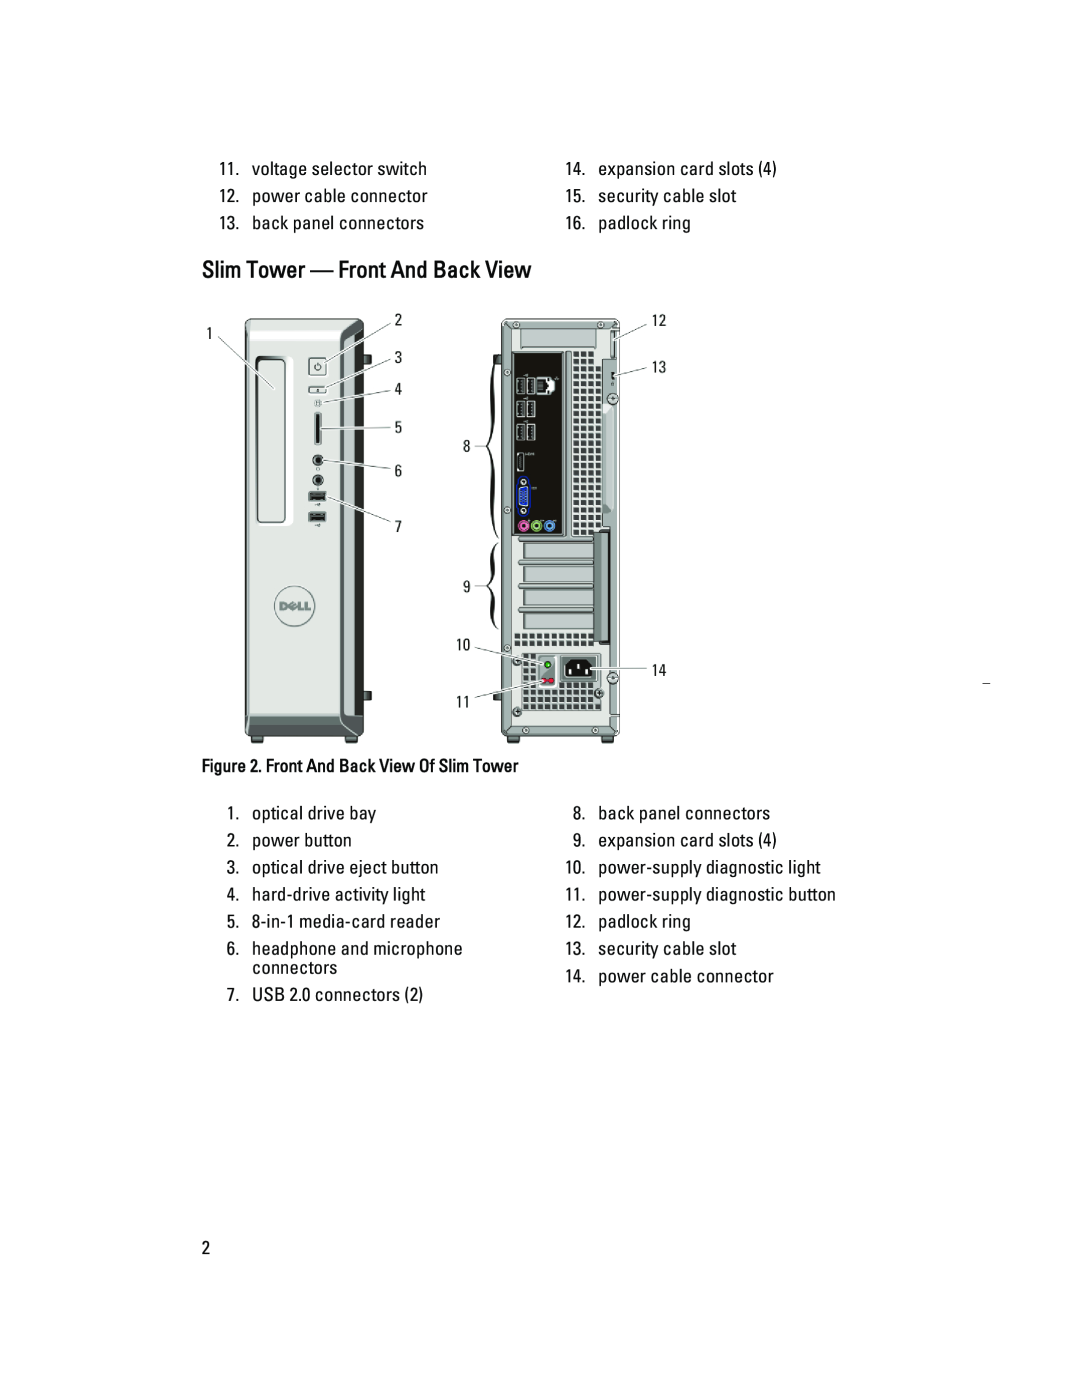 Dell 260S manual Slim Tower - Front And Back View, power-supply diagnostic button 